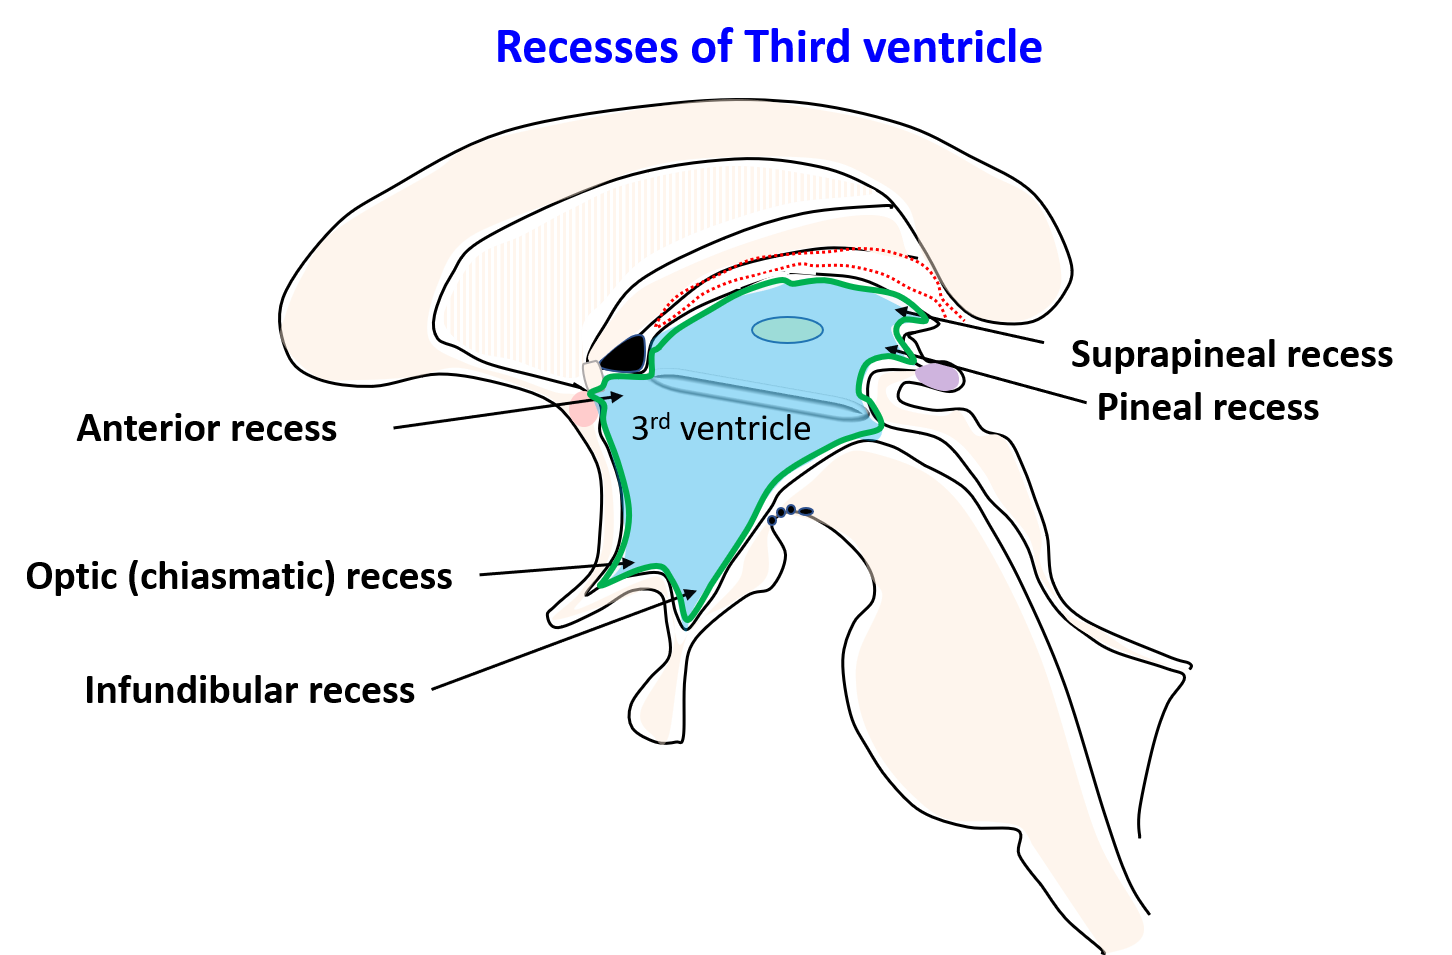  Recesses of third ventricle